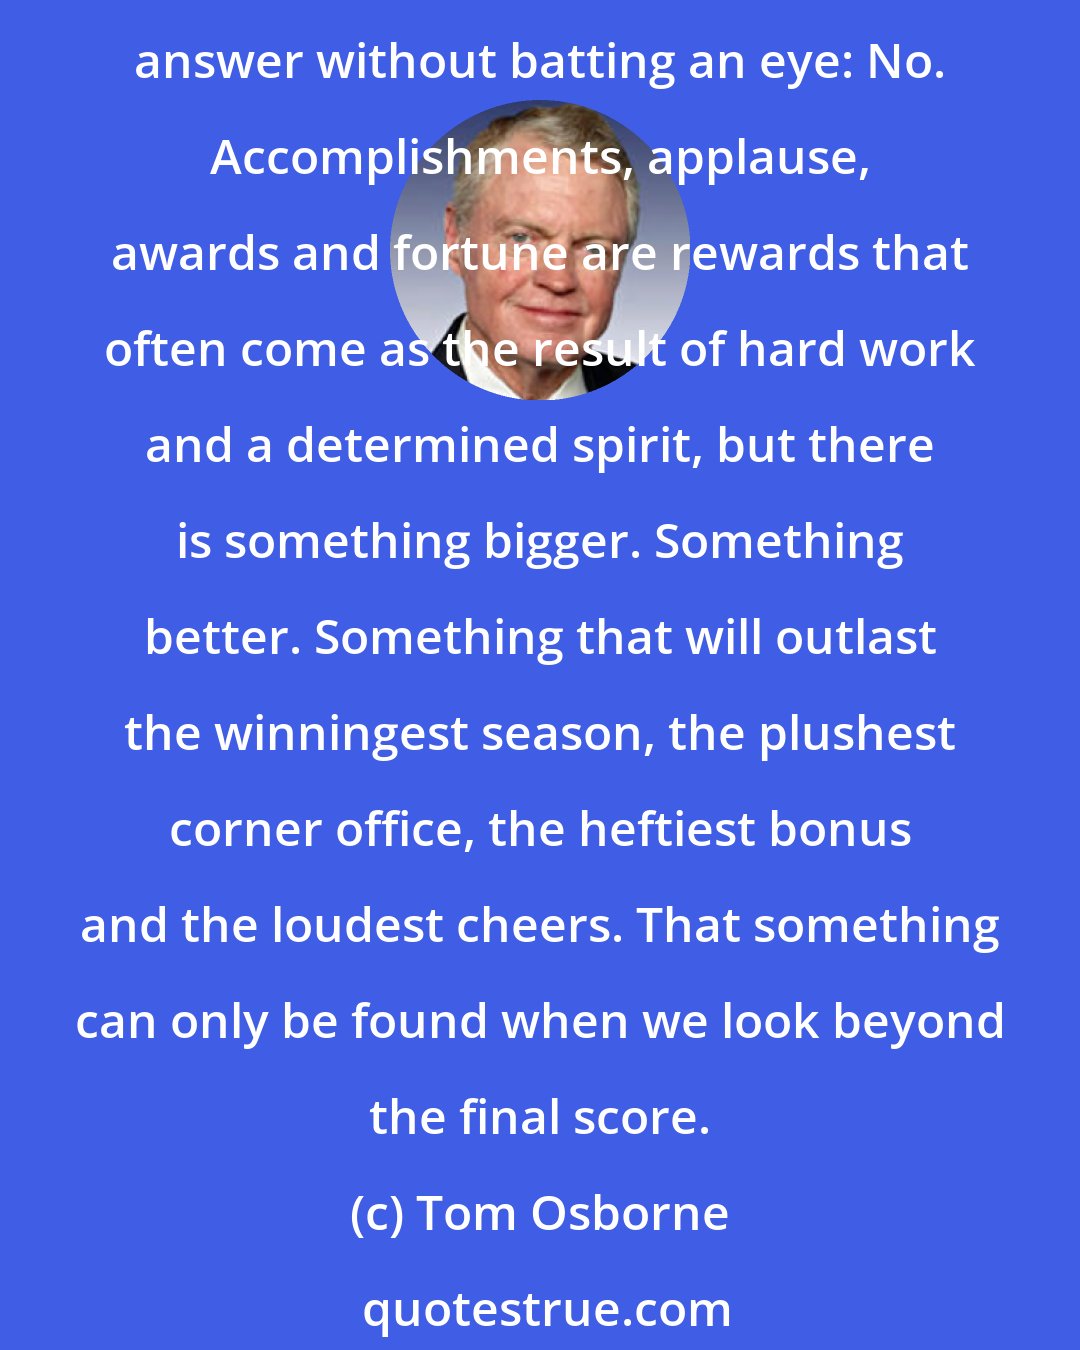 Tom Osborne: Is success just about winning? Acclaim? Trophies? Wealth? Our personal happiness or satisfaction? I have been blessed to experience some of these over the years, and I can answer without batting an eye: No. Accomplishments, applause, awards and fortune are rewards that often come as the result of hard work and a determined spirit, but there is something bigger. Something better. Something that will outlast the winningest season, the plushest corner office, the heftiest bonus and the loudest cheers. That something can only be found when we look beyond the final score.